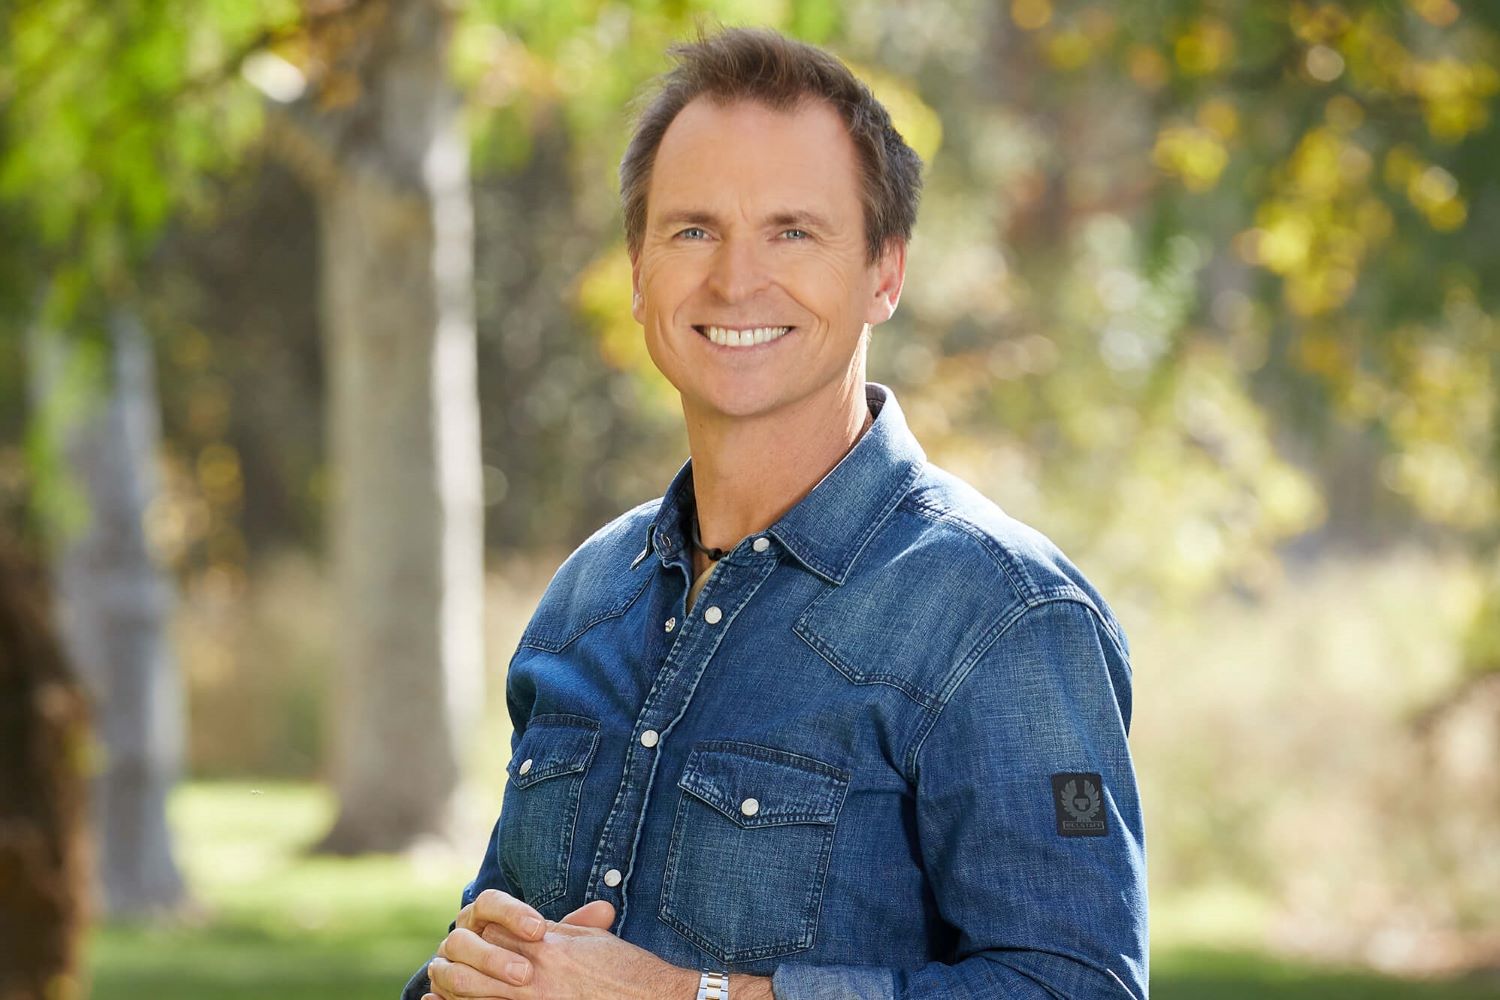 Phil Keoghan, who has hosted every season of 'The Amazing Race,' wears a blue denim button-up shirt.